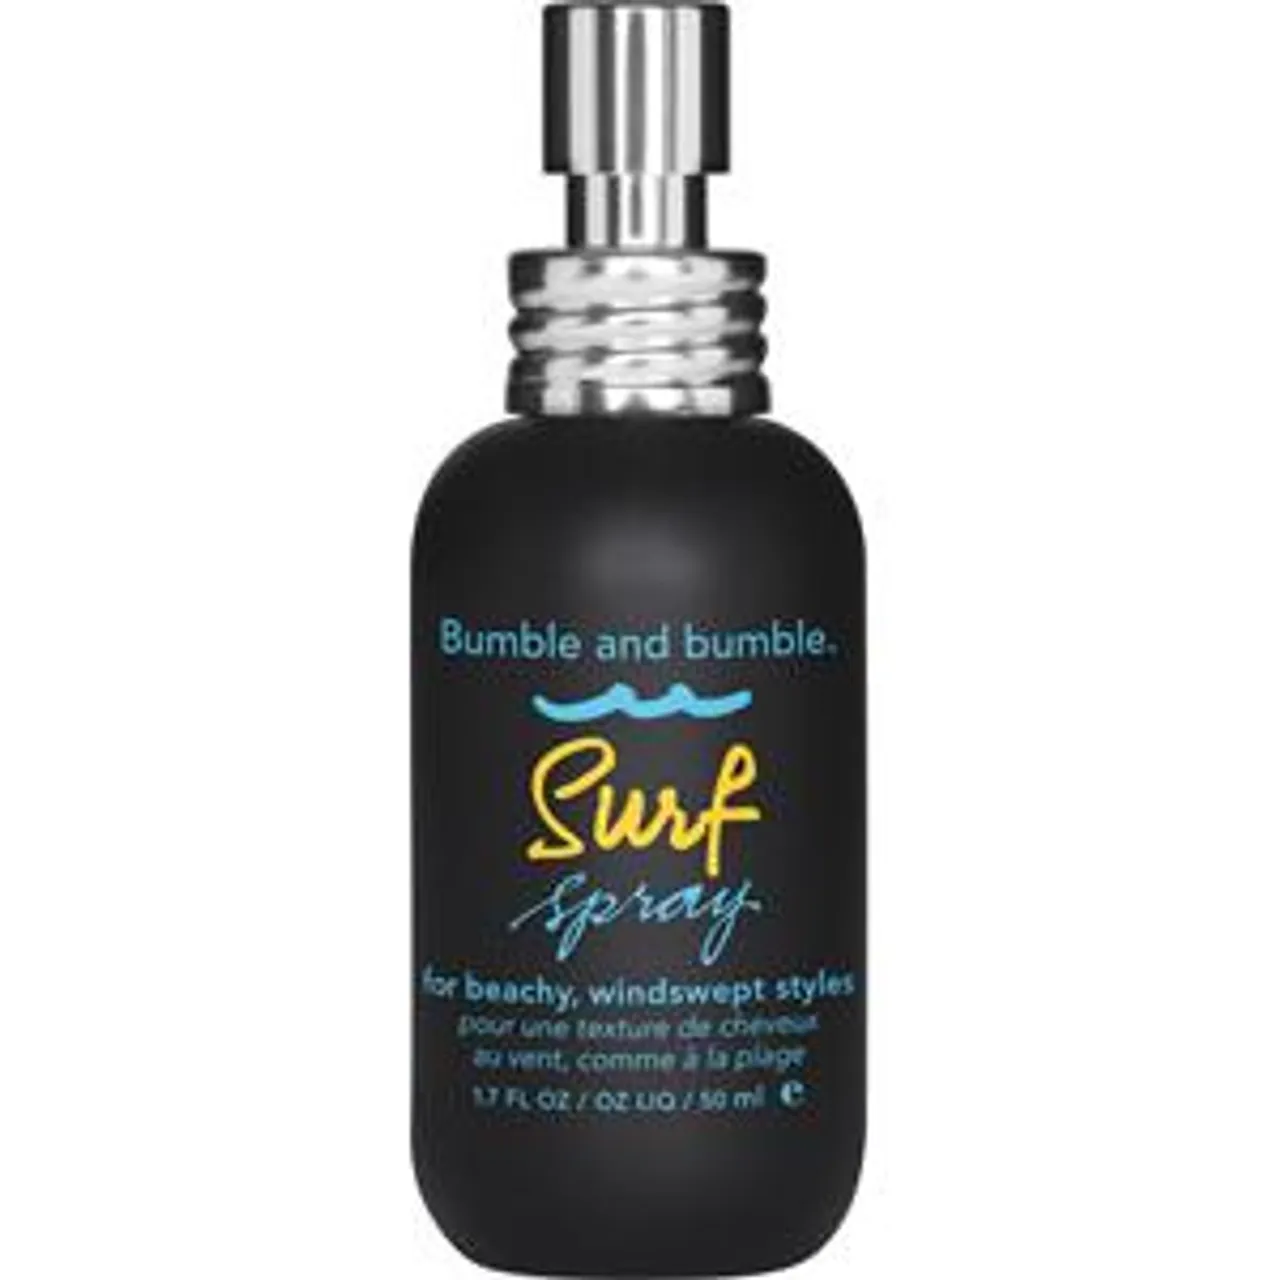 Bumble and bumble Surf Spray Female 125 ml